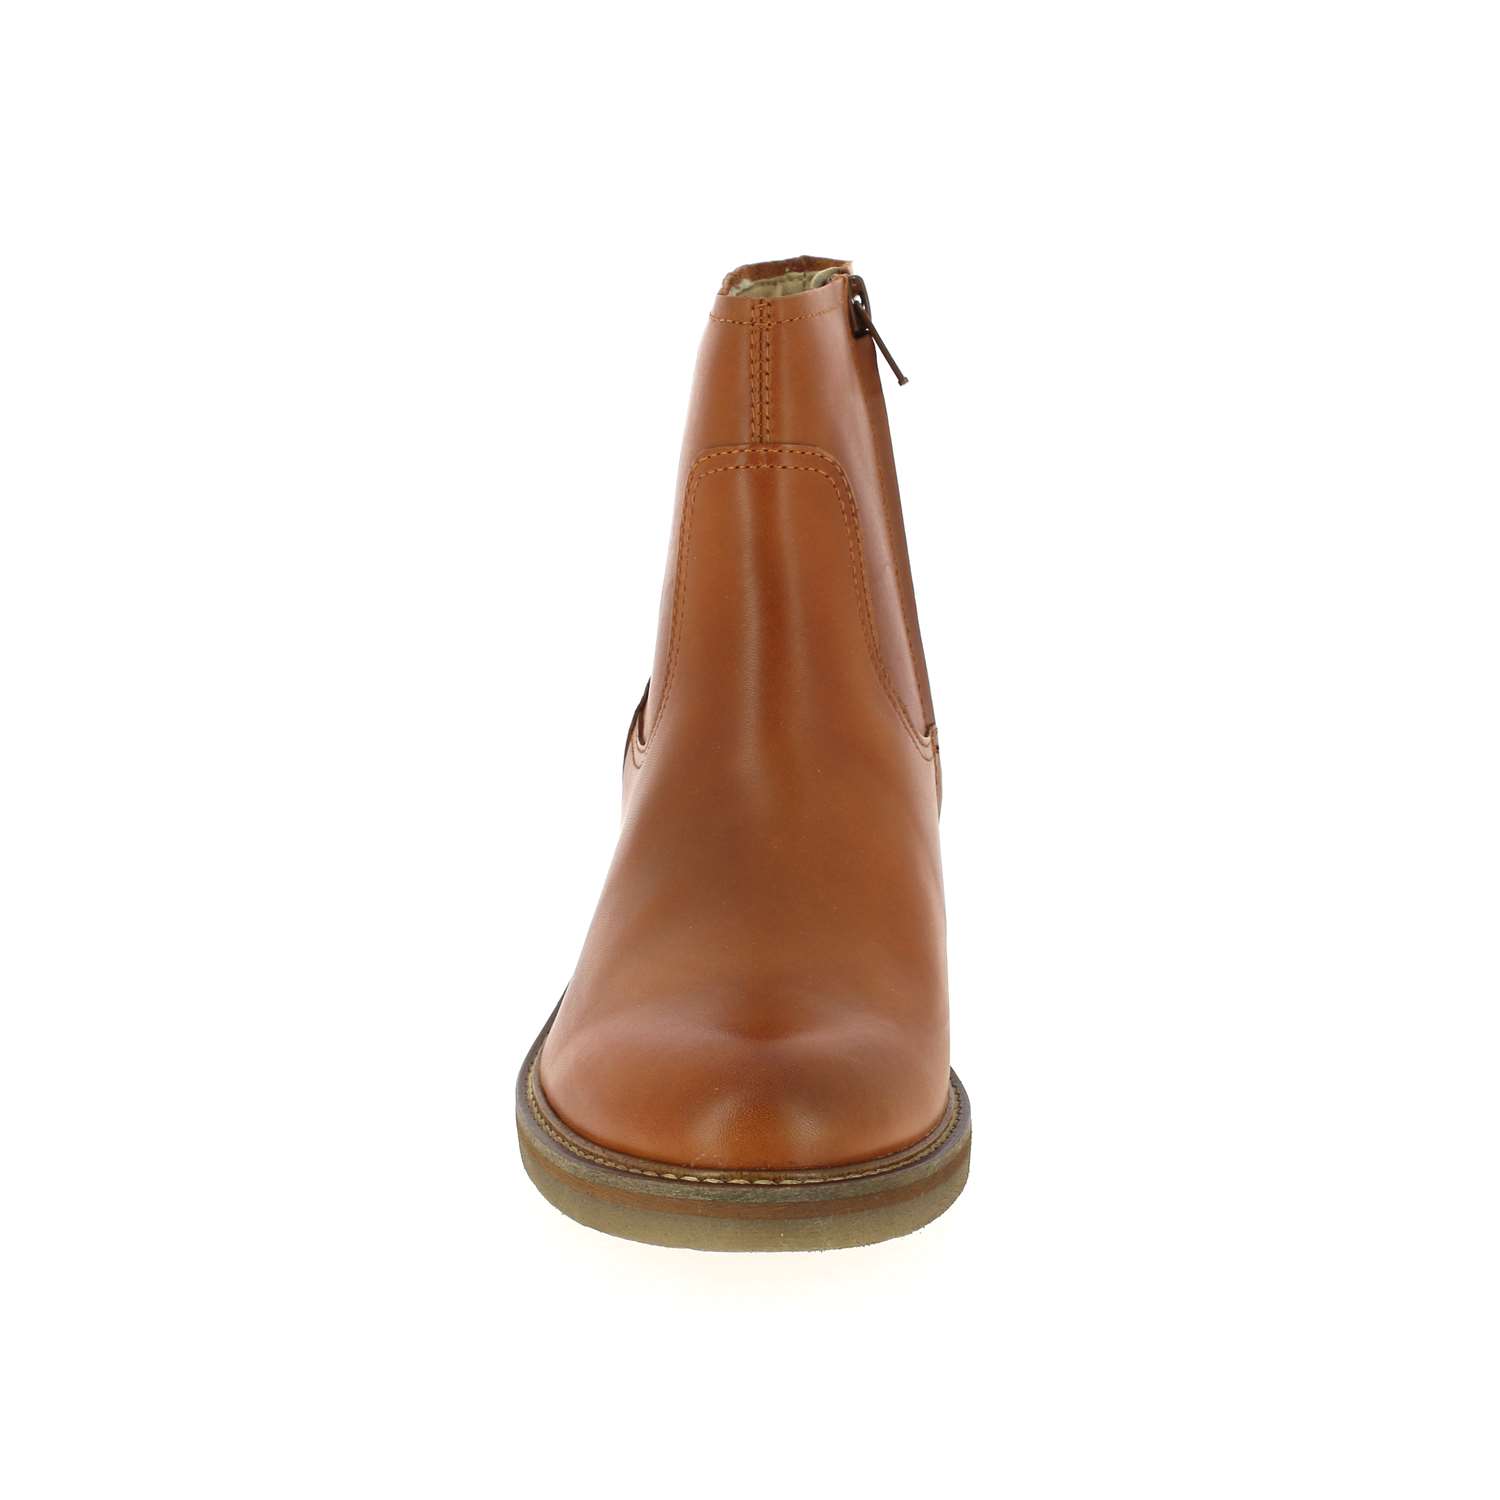 03 - OXYBOOT - KICKERS - Boots et bottines - Cuir